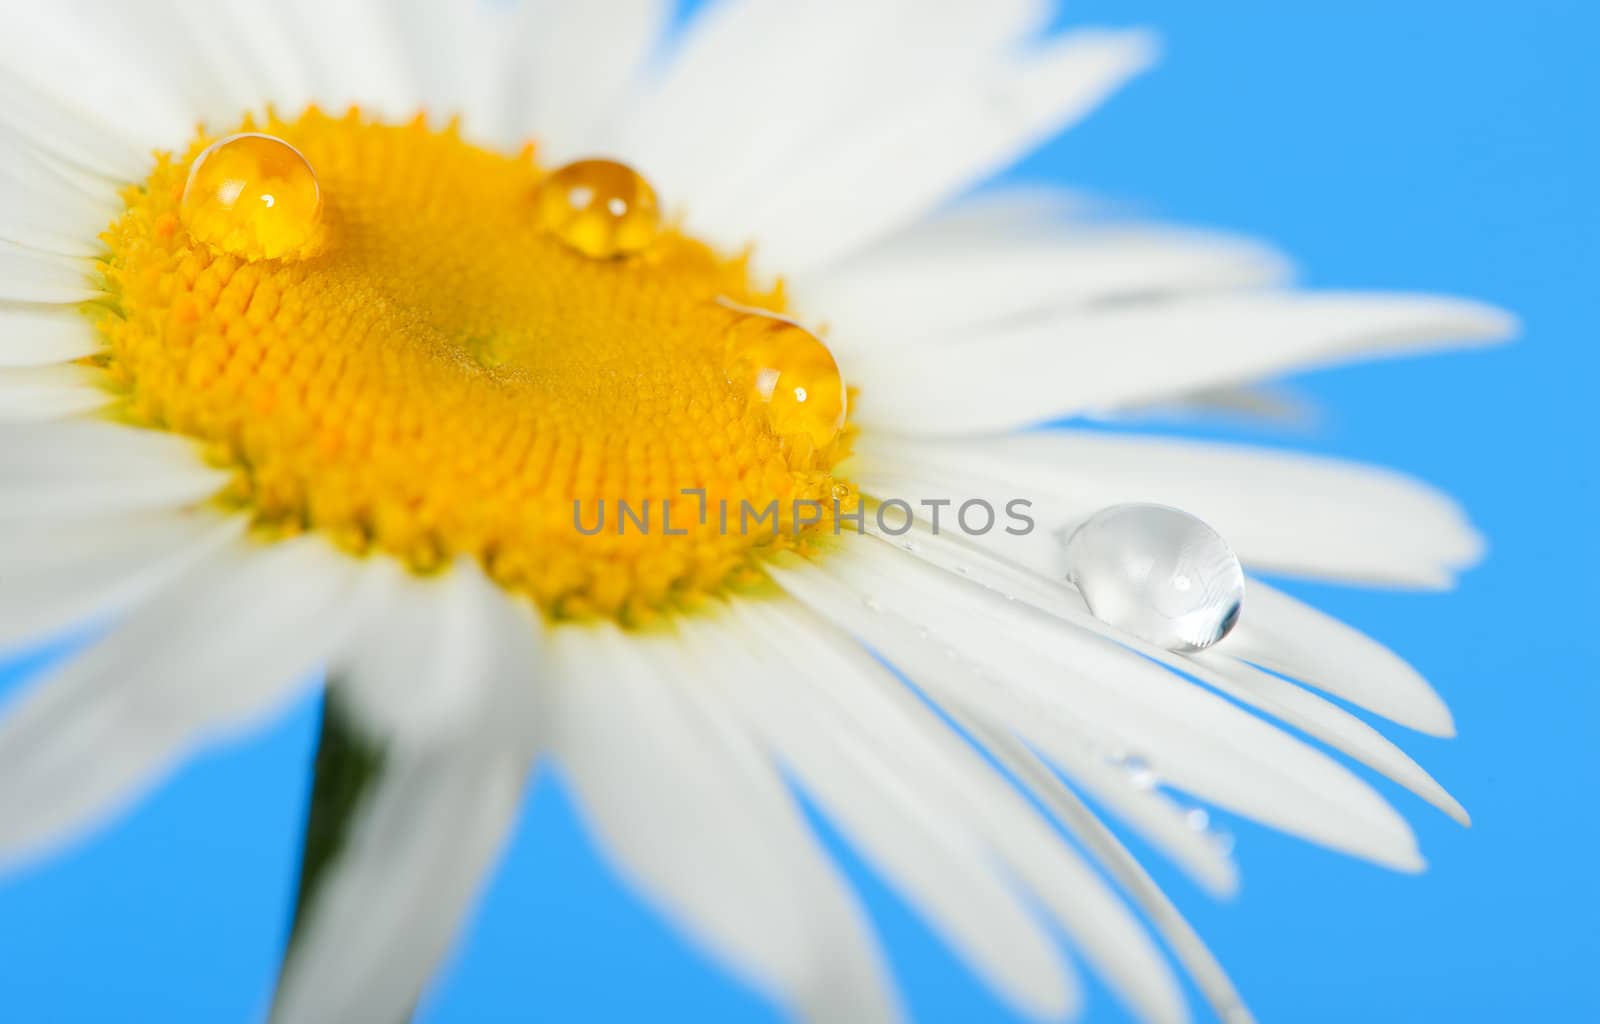 Camomile with dew drops by galdzer